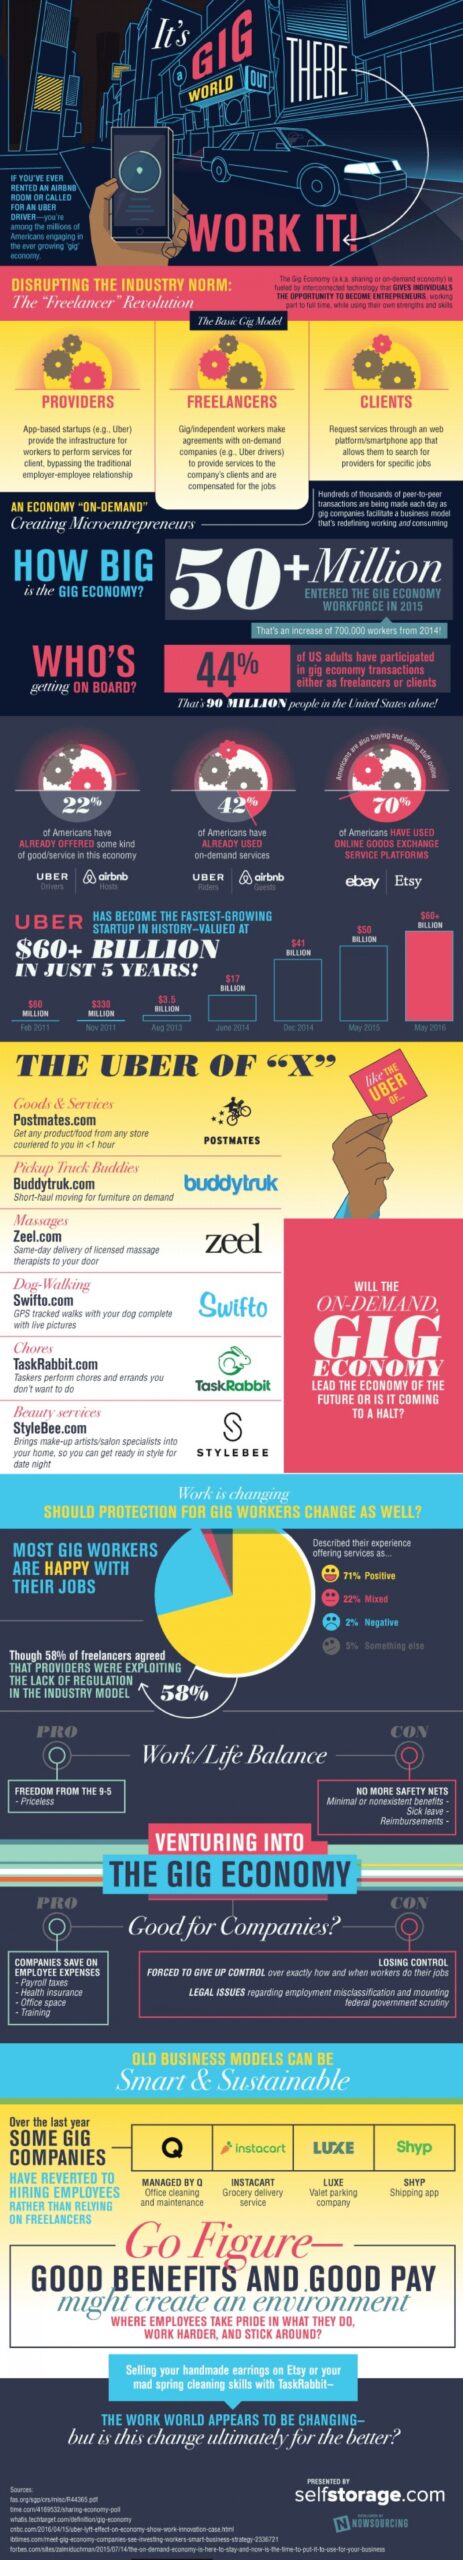 You Probably Use The Gig Economy And Don't Know It - See more at: http://visual.ly/you-probably-use-gig-economy-and-dont-know-it#sthash.LzFnG02w.dpuf